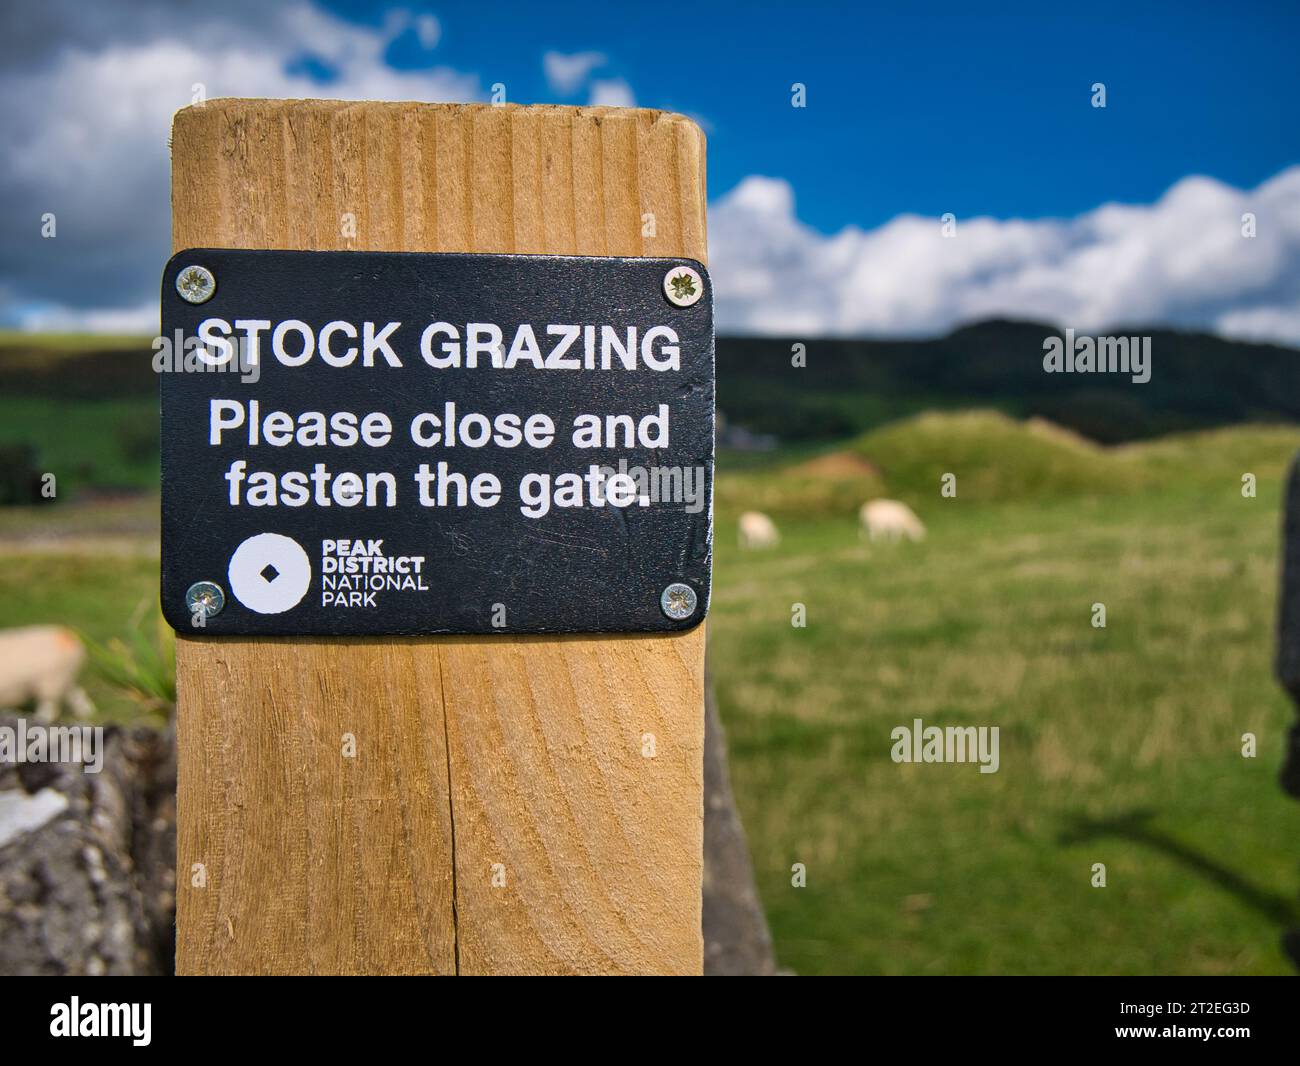 A black and white sign fixed to a wooden post advises that farm stock are grazing in the field ahead and asks walkers to close and fasten the gate. Stock Photo